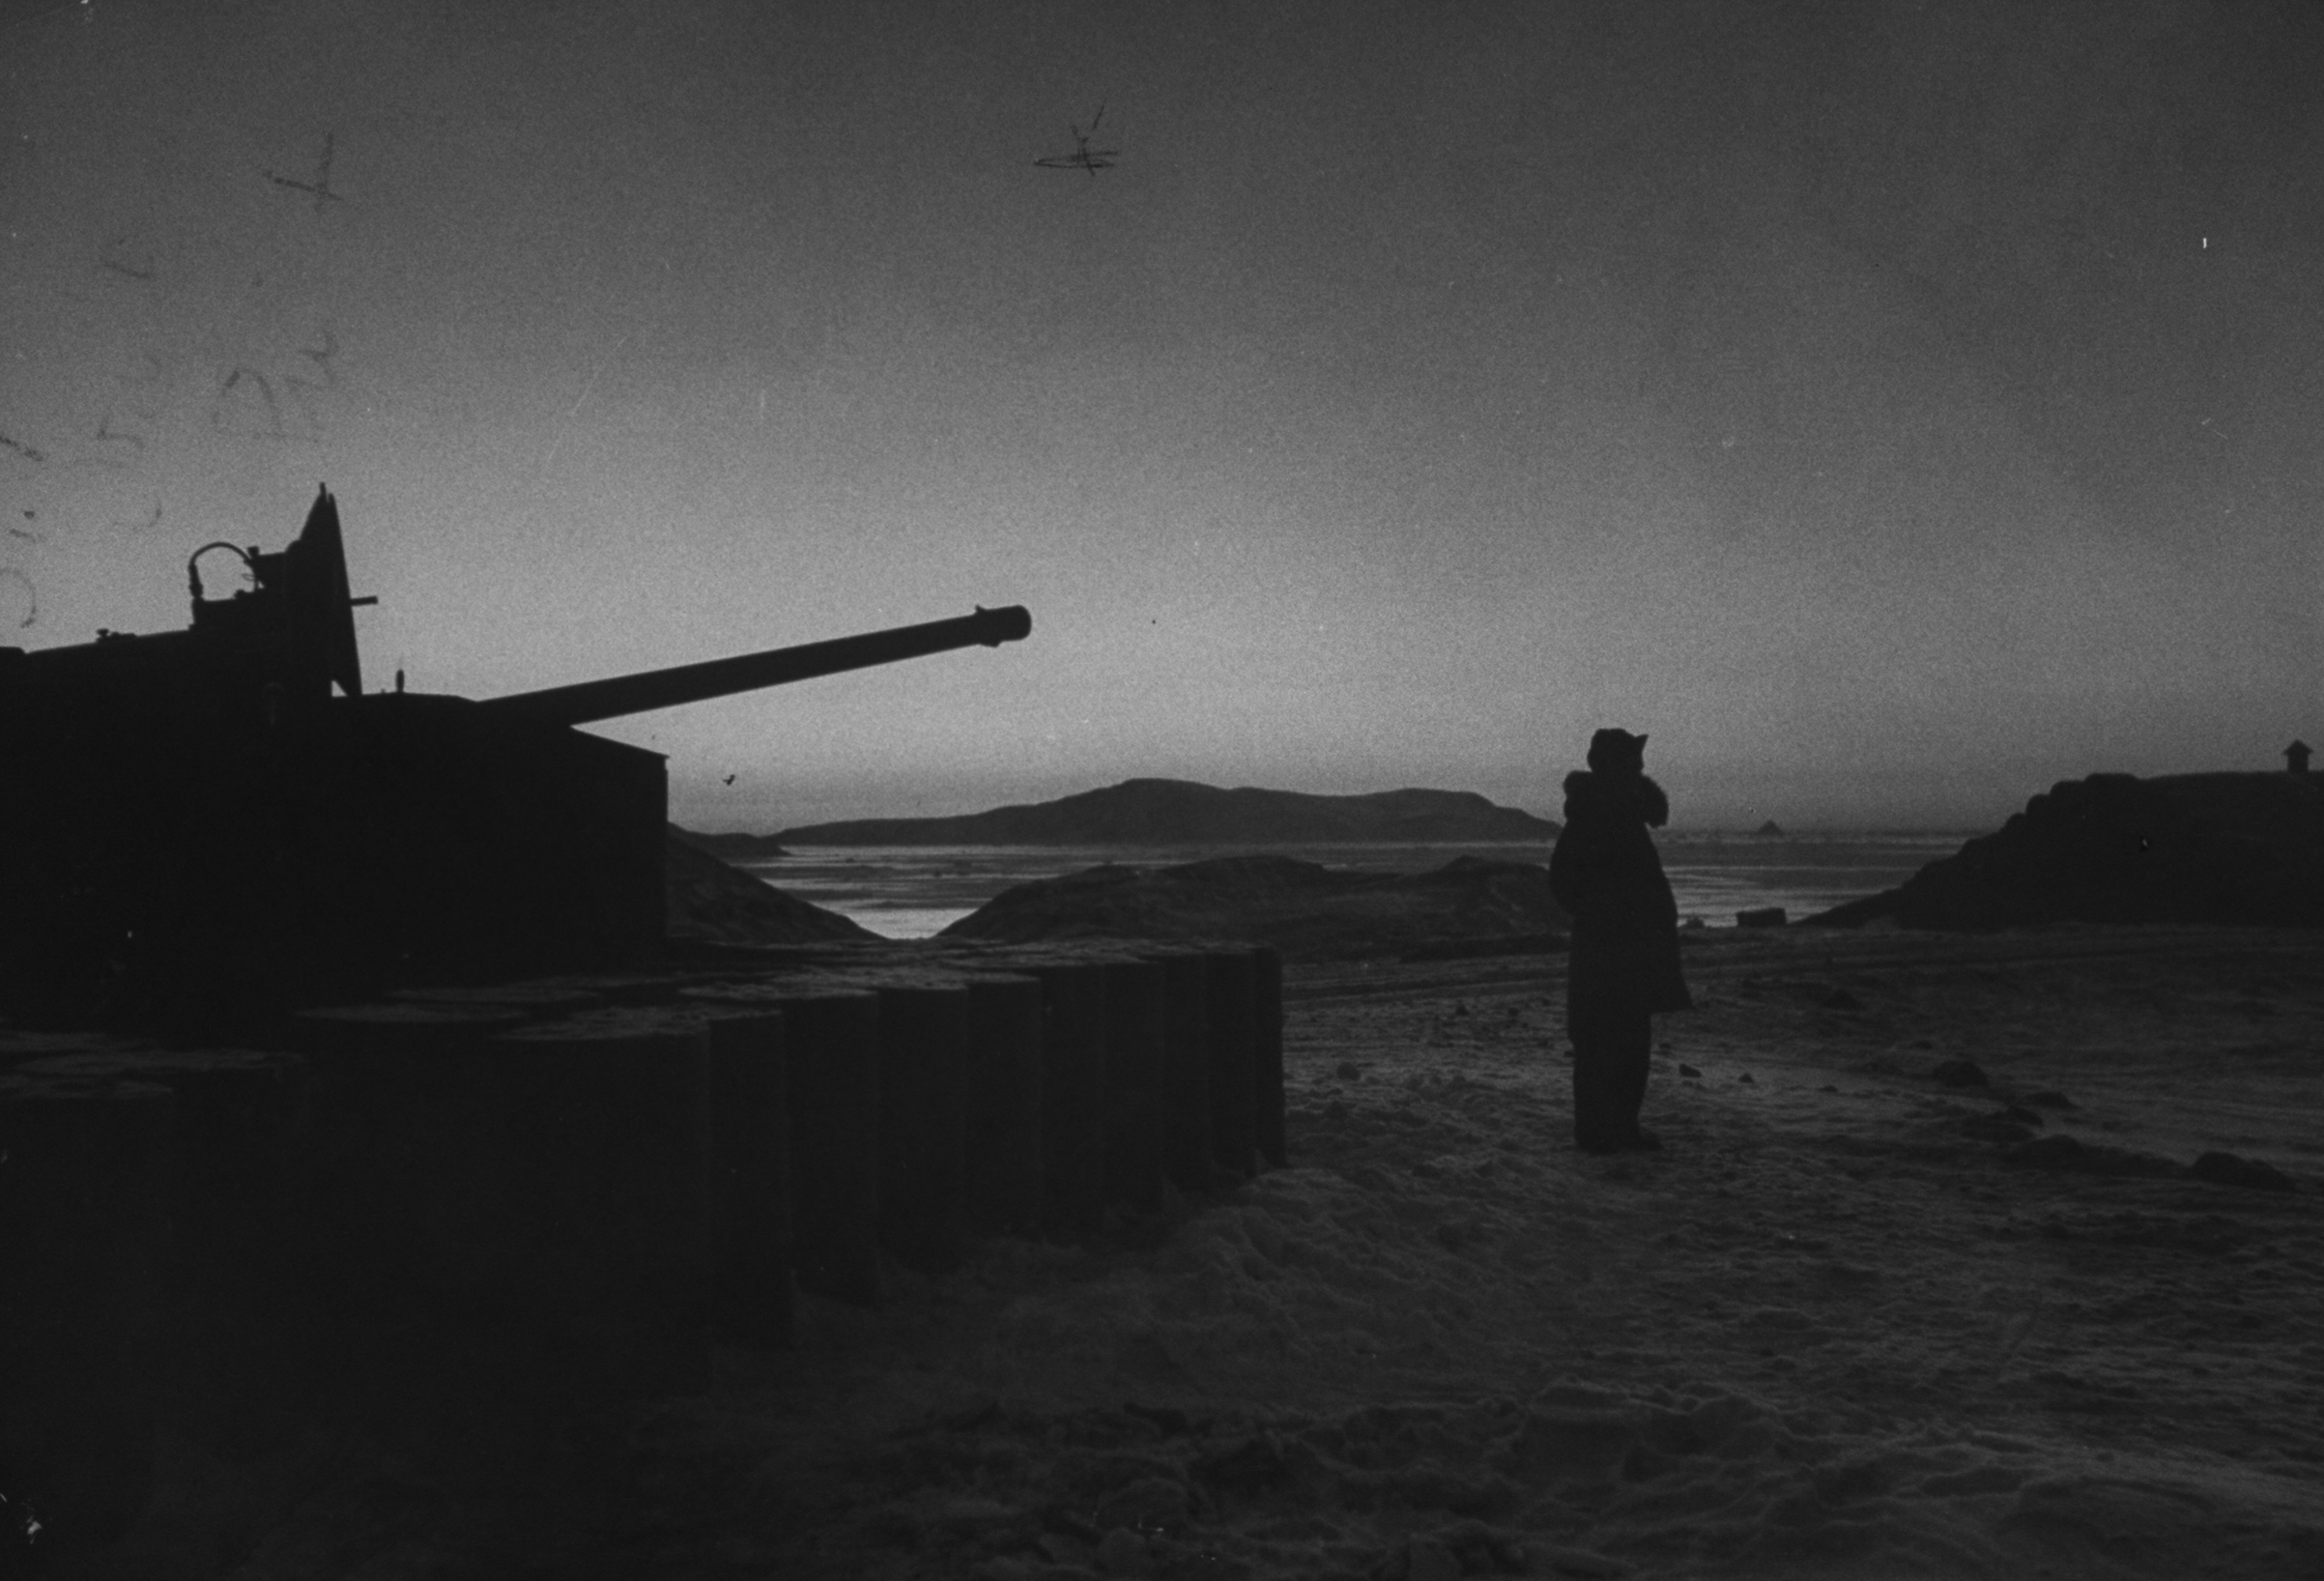 Antiaircraft gun such as this one guarded by an artilleryman in 1953 formed part of Thule Air base's intensive armament system and were manned on a 24-hour basis (George Silk—The LIFE Picture Collection/Getty)